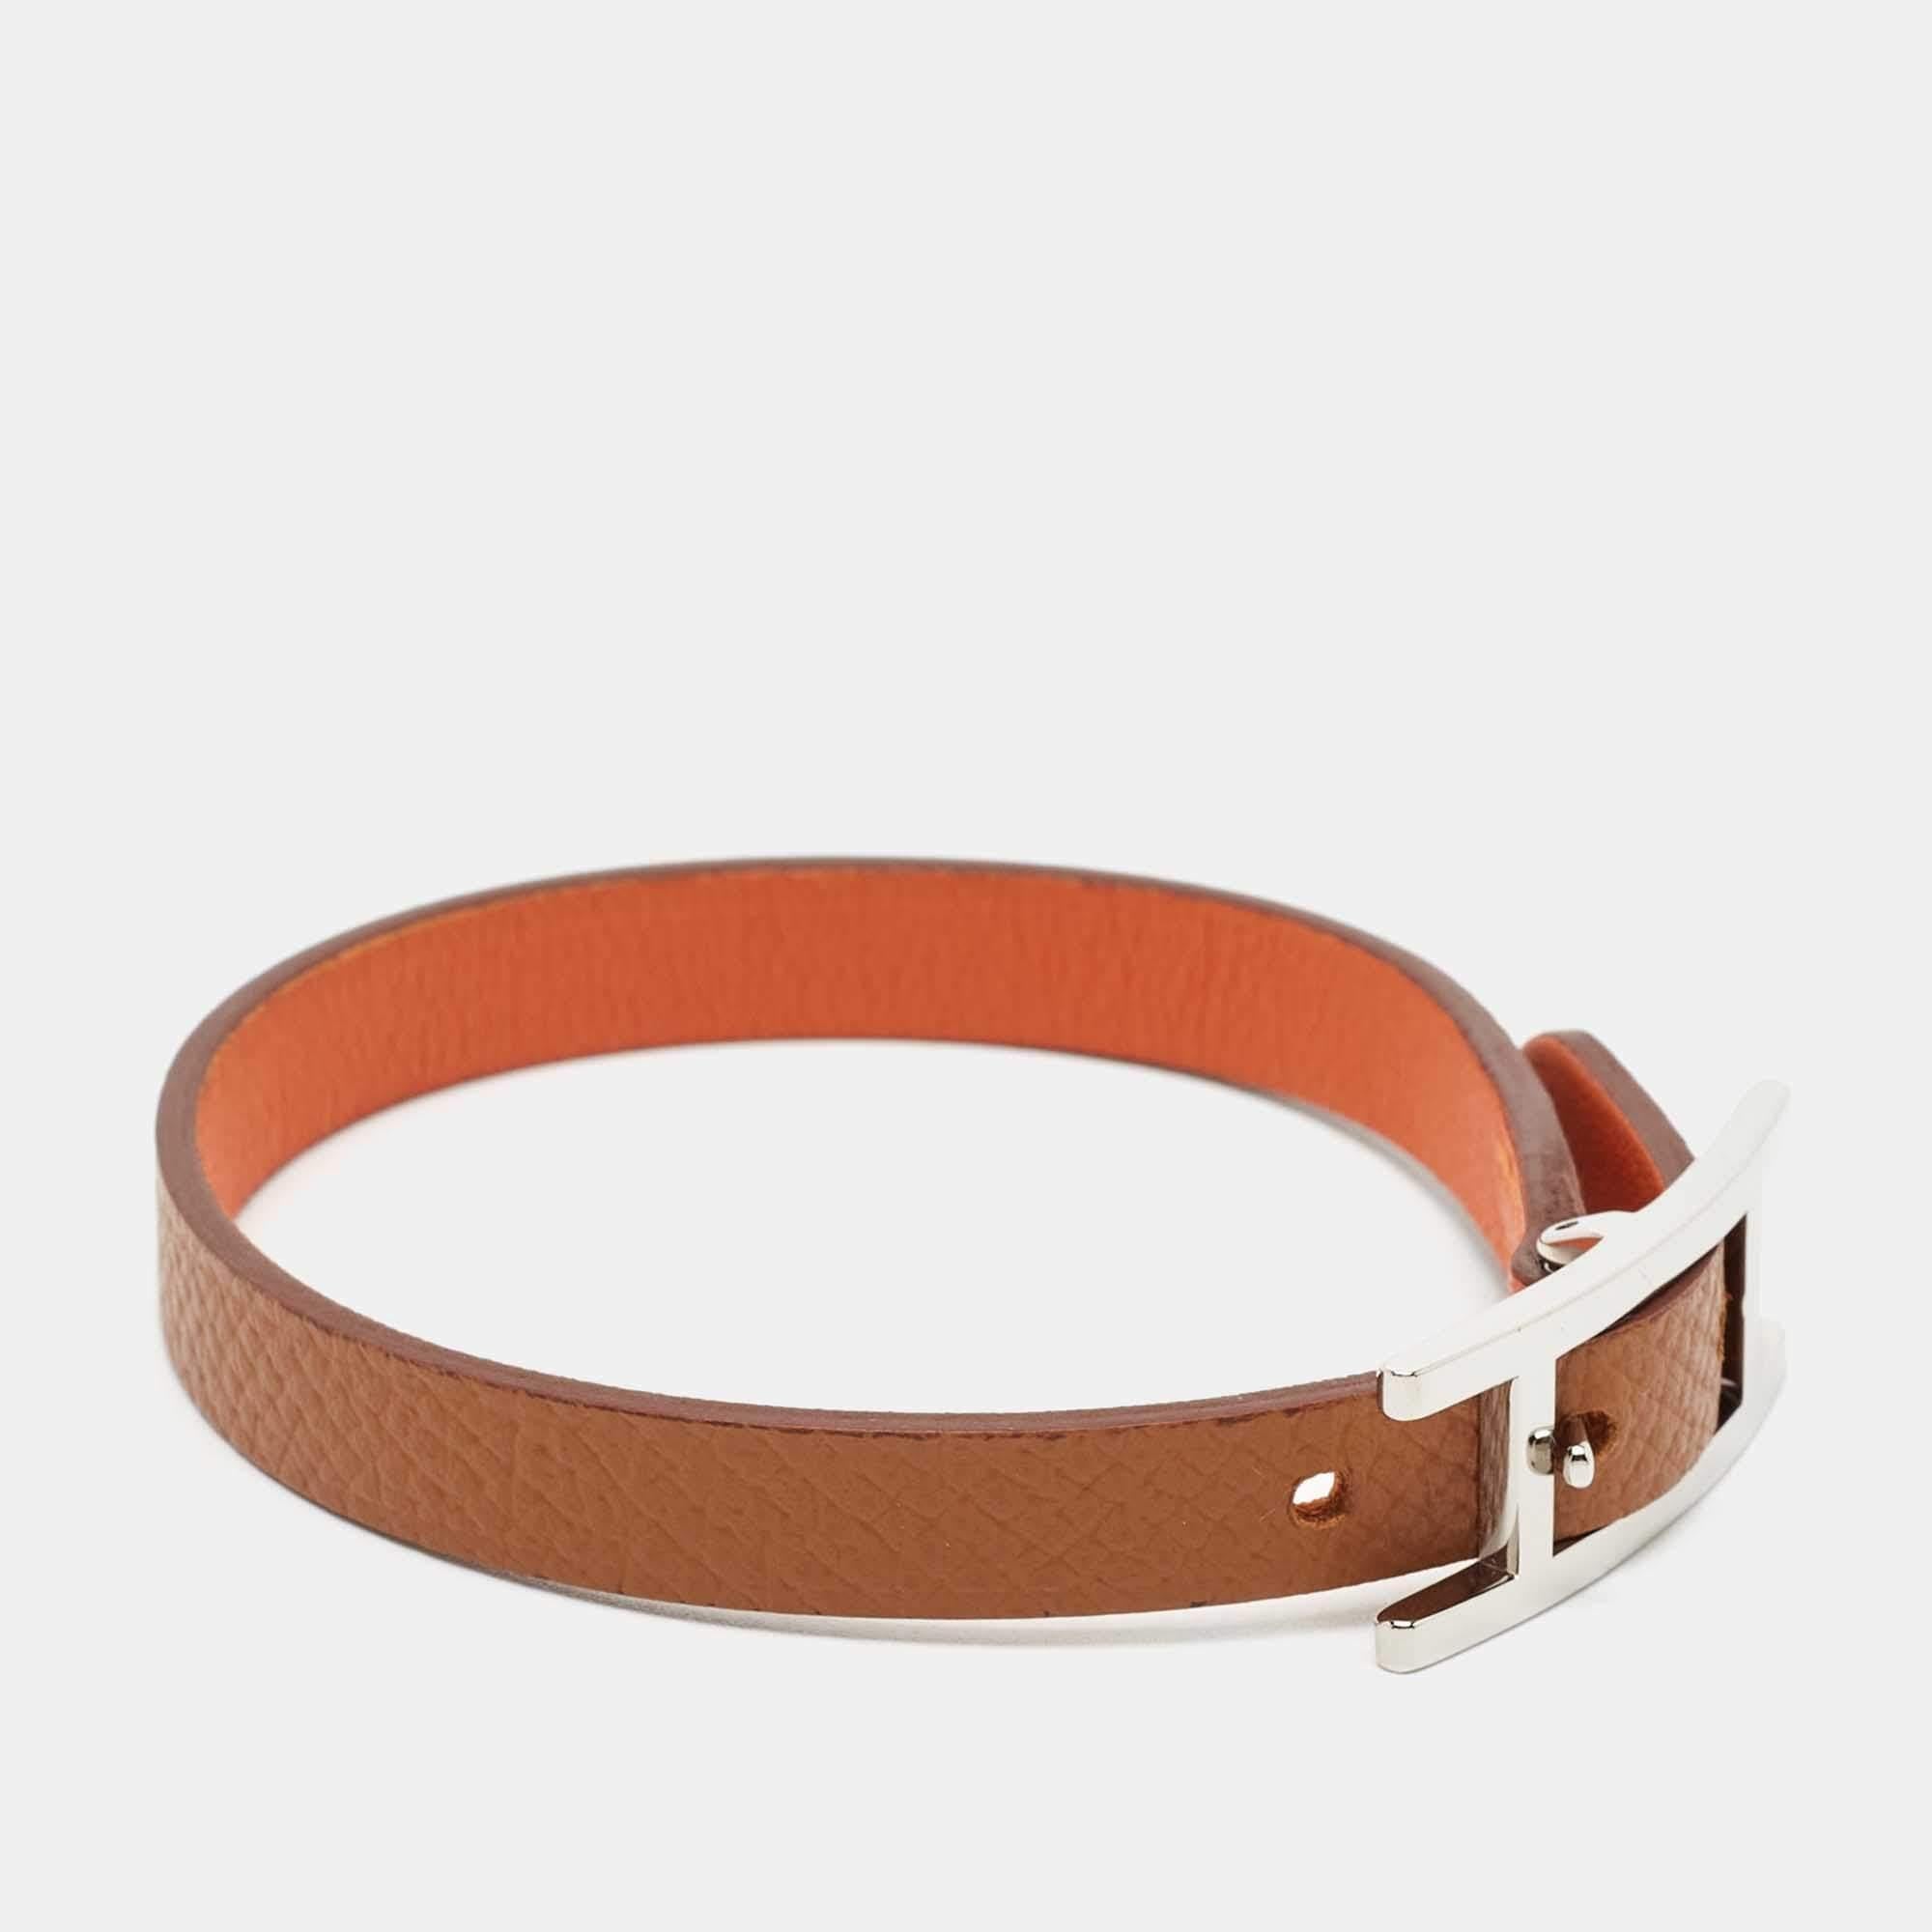 This classy Hermes bracelet can be worn over and over again once purchased. It will never go out of style. Constructed using brown and orange leather to be reversible, the piece is finished with a palladium-plated H buckle.

Includes: Original Box

